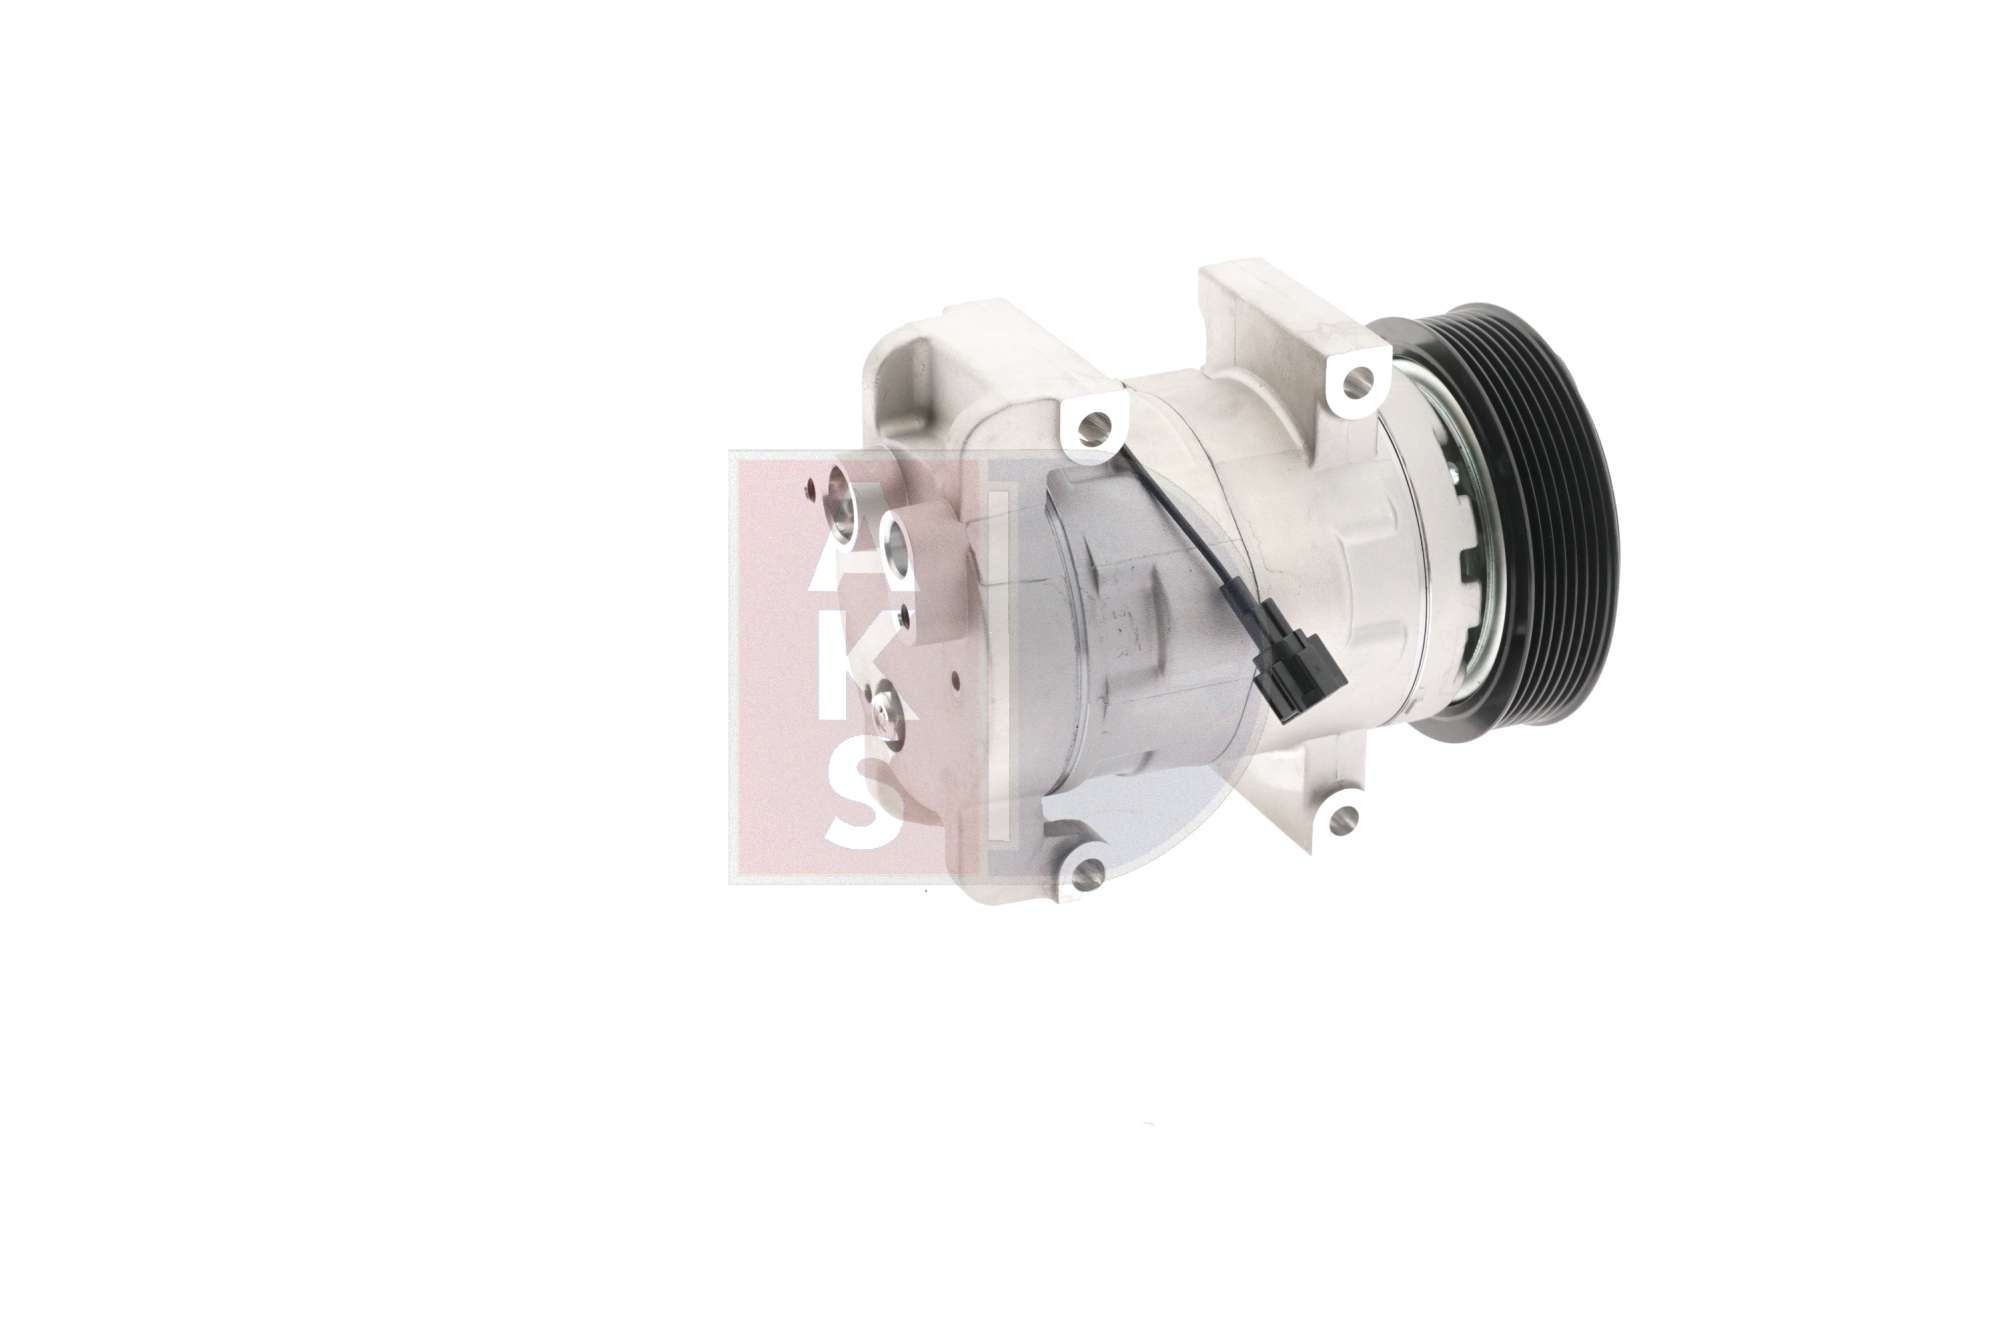 Air conditioning compressor 852662N from AKS DASIS